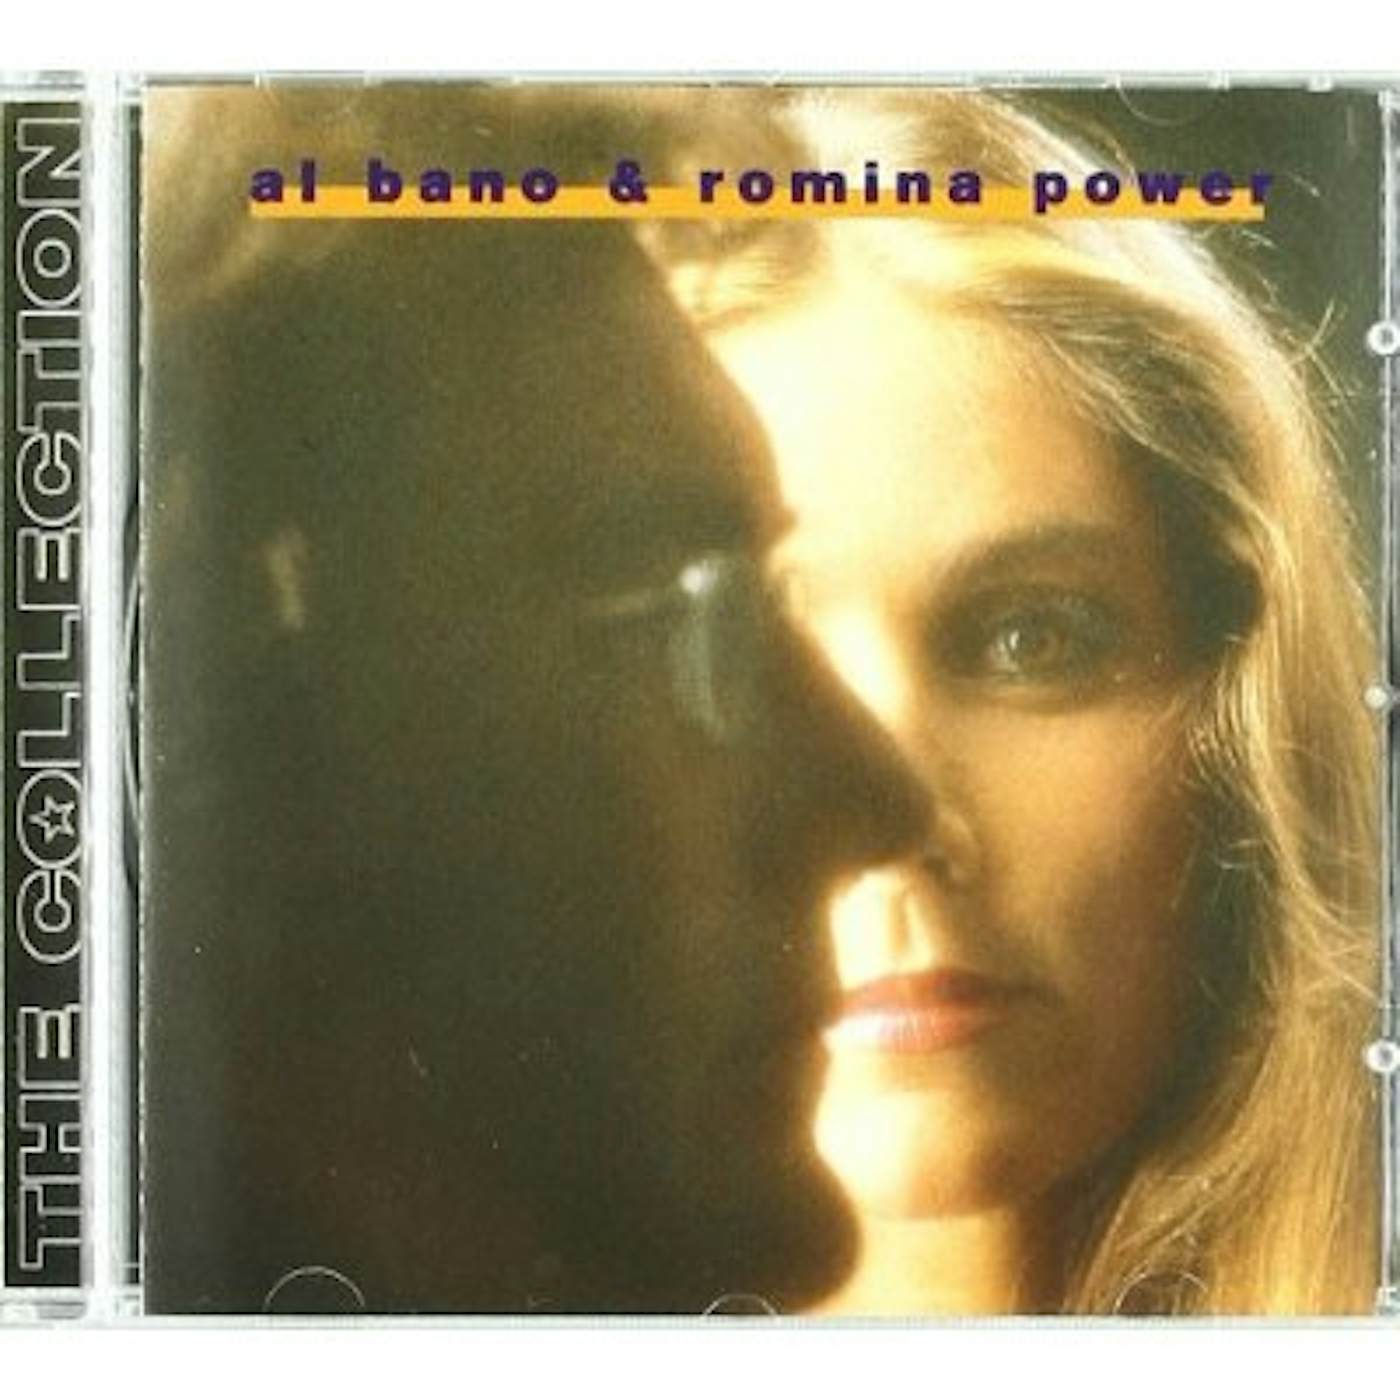 Al Bano And Romina Power COLLECTION CD